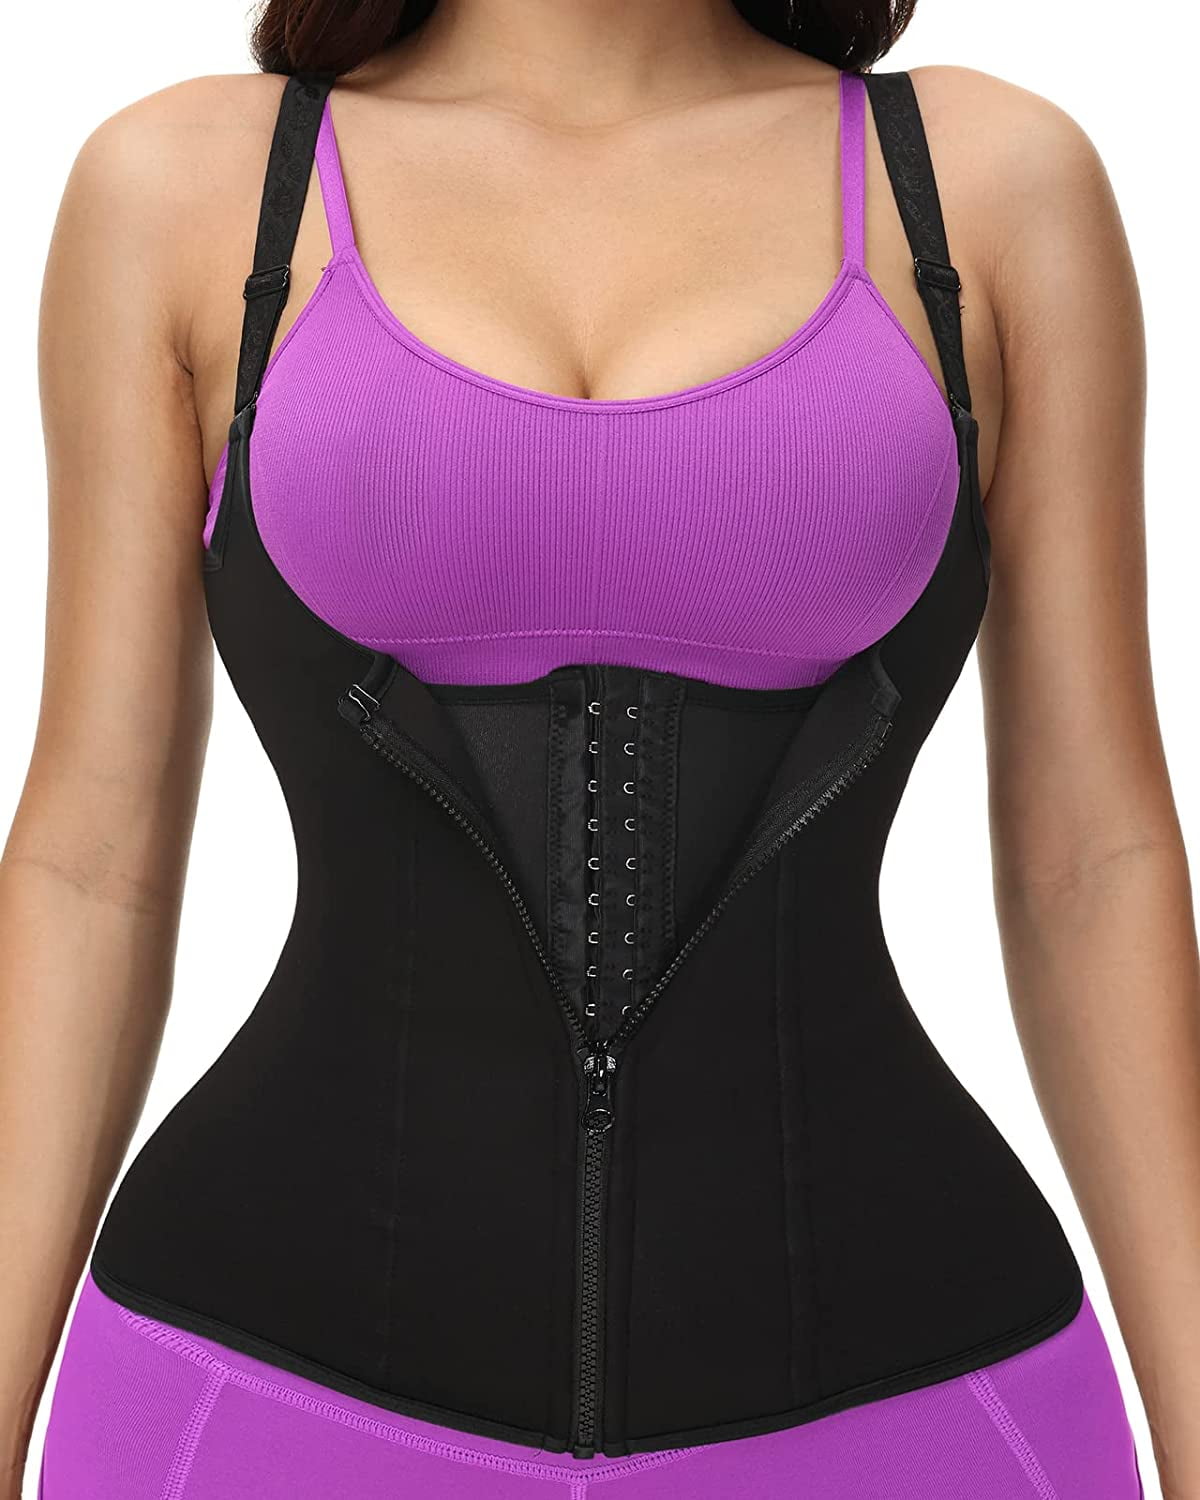 Corset Waist Trainer Vest for Women Weight Loss ,Tummy Control